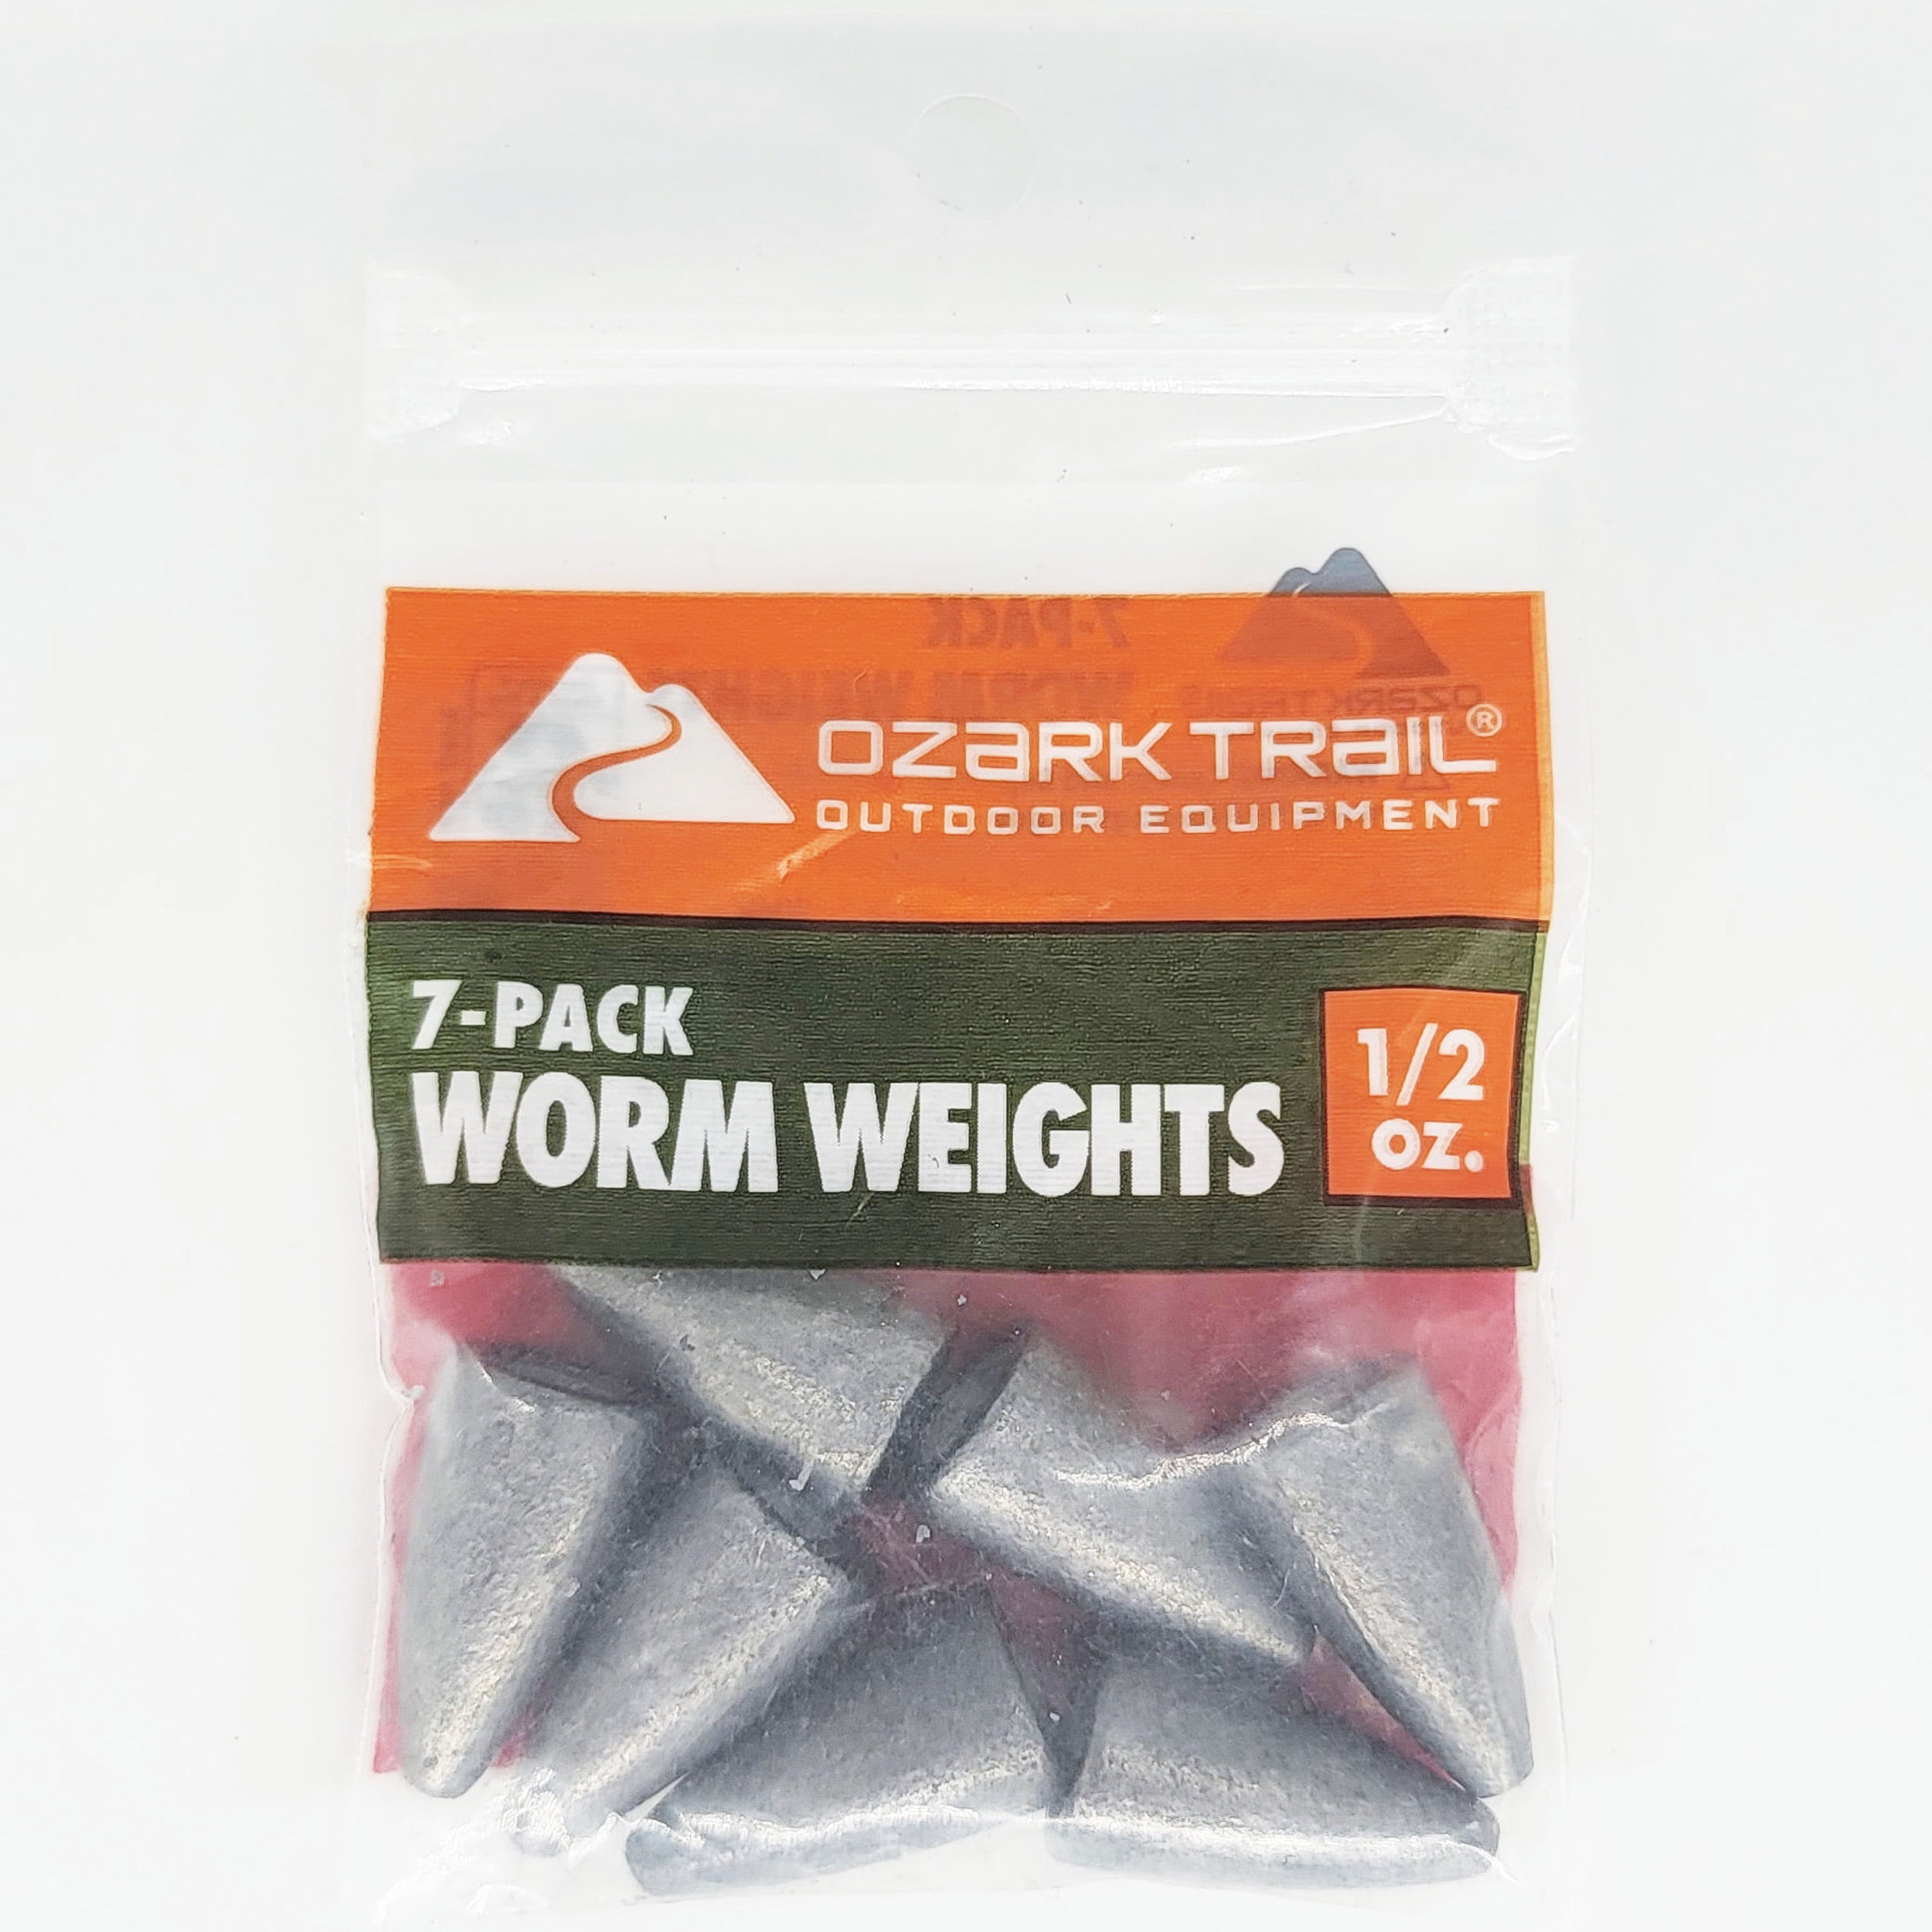 Ozark Trail Worm Weight 1/2 oz, Fishing Lead Weight, Product Size 2.2x1.2cm